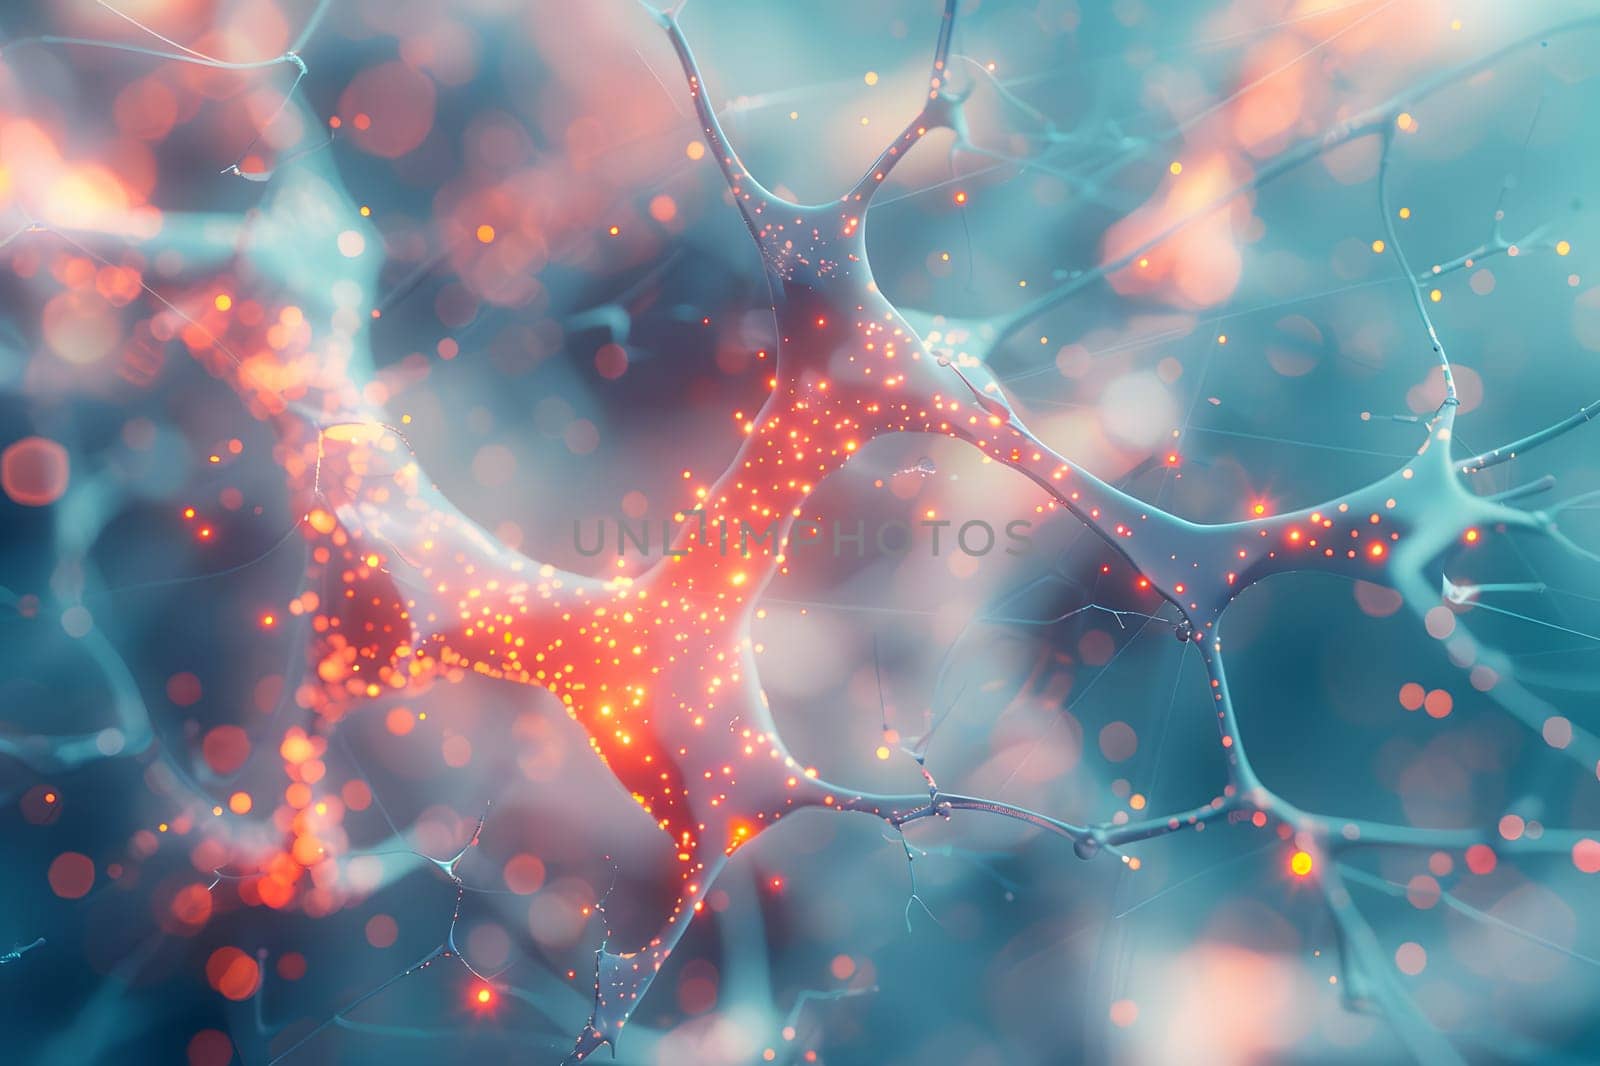 a computer generated image of a nerve cell in the brain by Nadtochiy